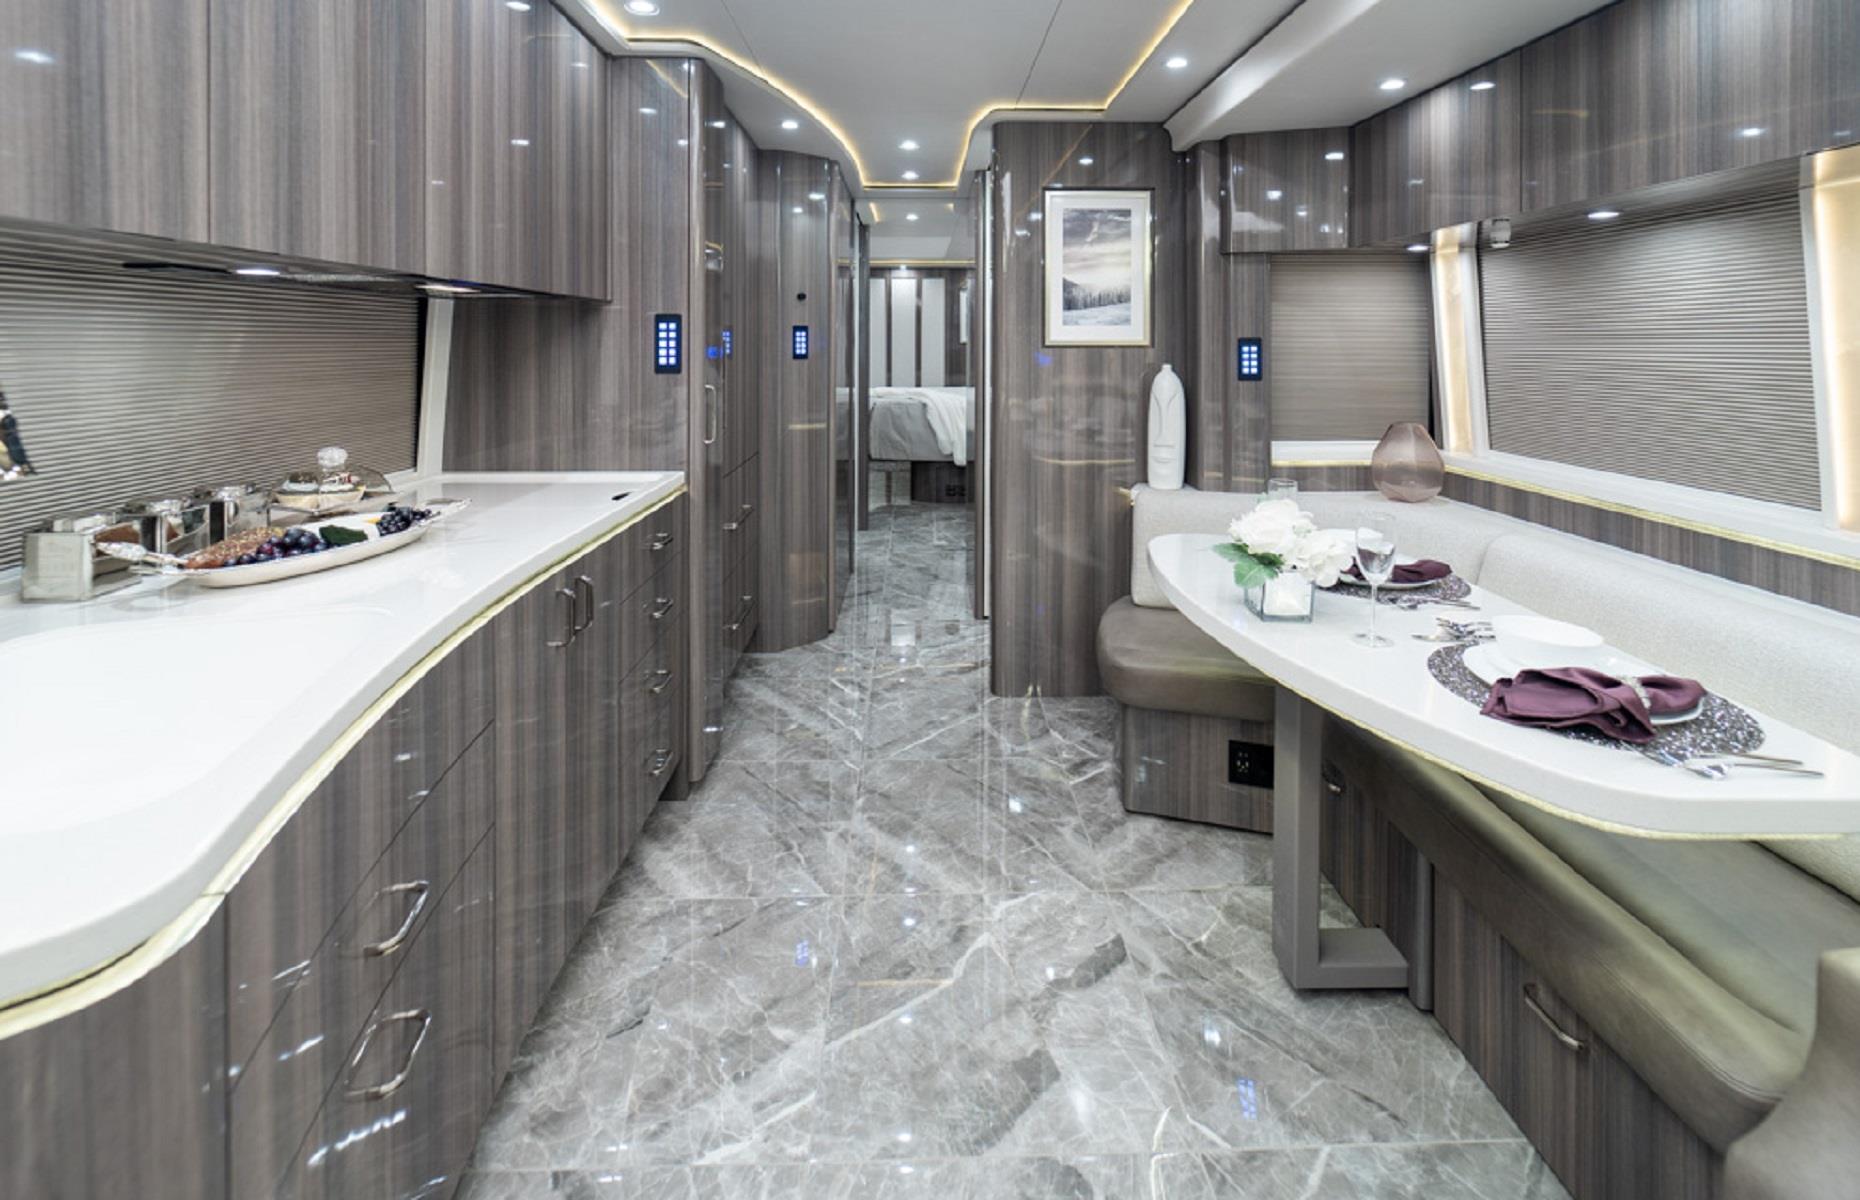 <p>The RV is packed with extravagant amenities and comfort-adding extras, like a fireplace insert in the salon, four air conditioning units and a 360-degree camera system. The kitchen has bespoke built-in storage for your wine bottles, a Sub-Zero refrigerator and a transforming dining table that can extend to host larger gourmet gatherings.</p>